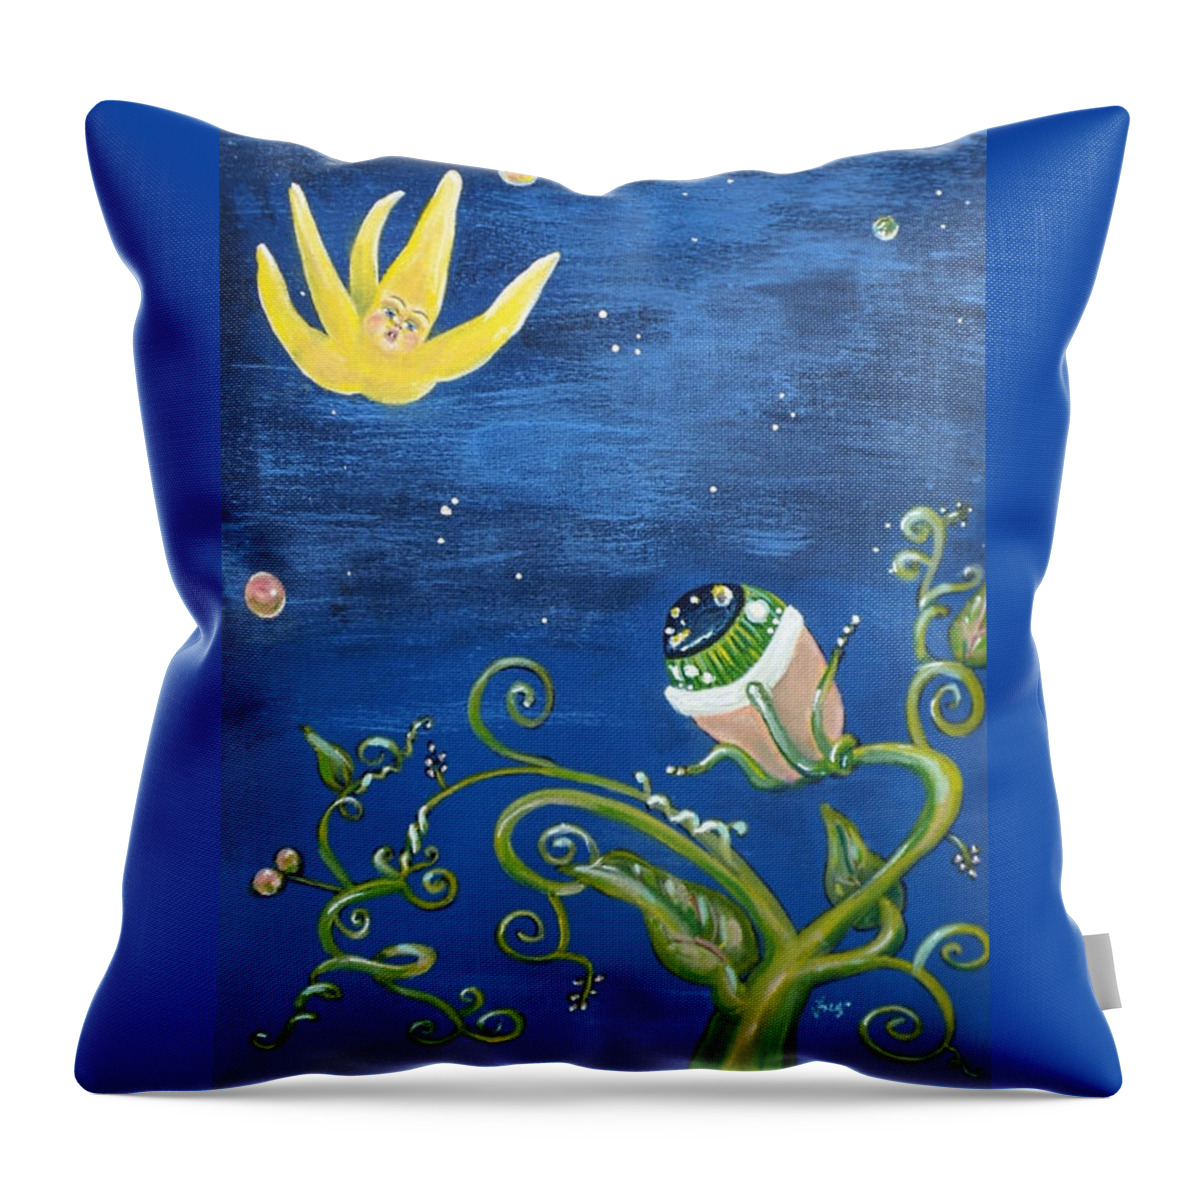 Surreal Throw Pillow featuring the painting Falling Star and Venus Eyesnap by Vicki Noble